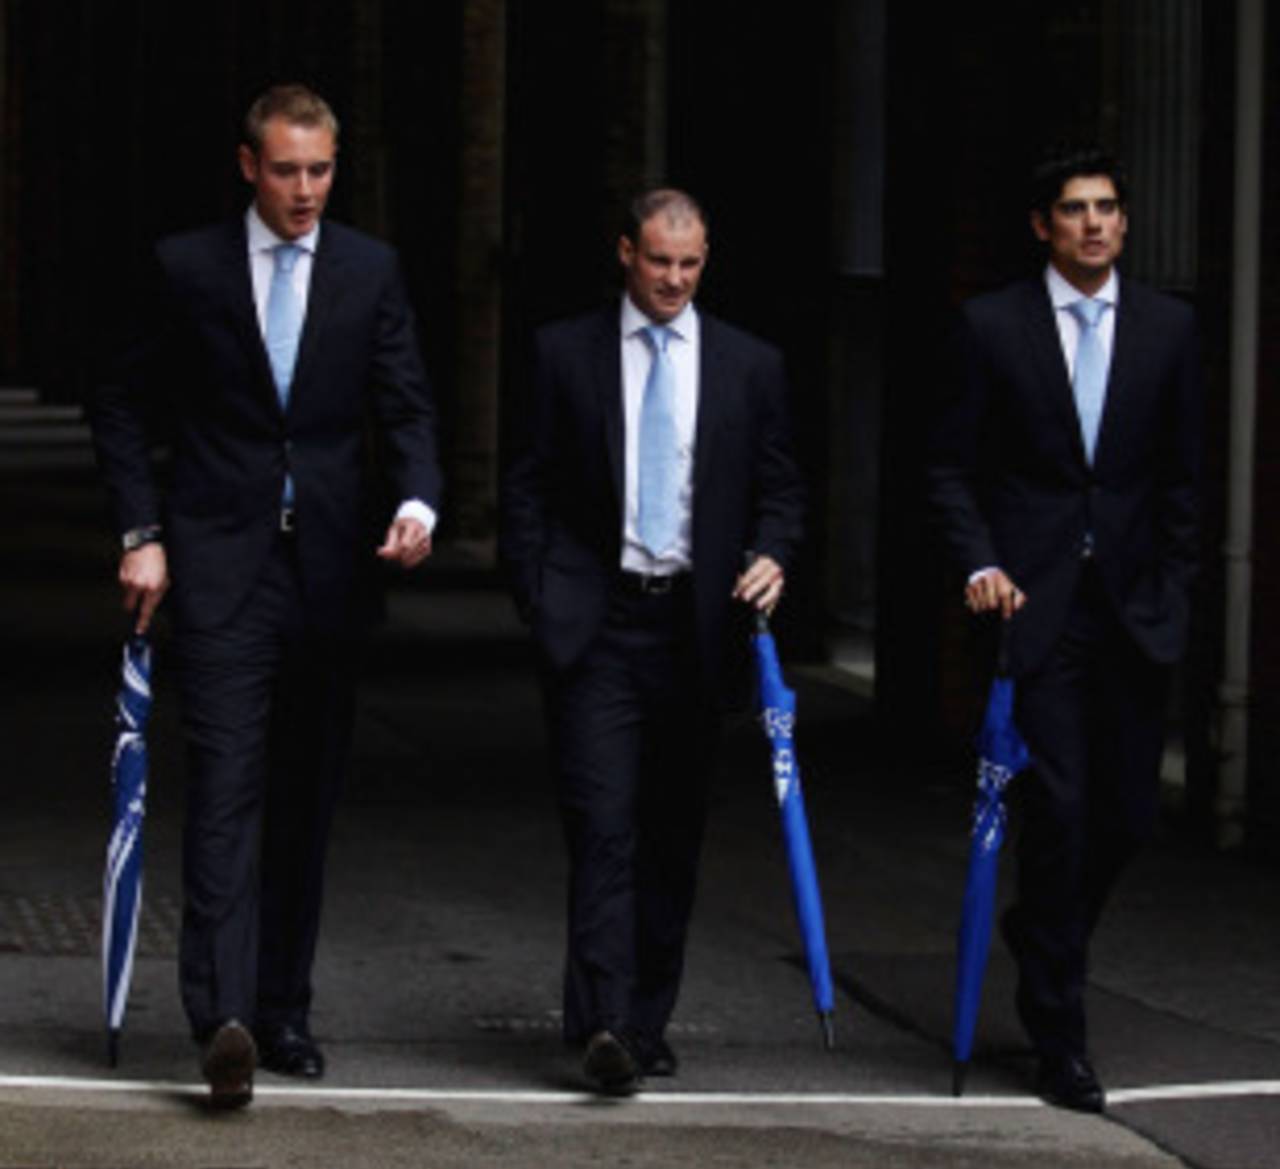 Alastair Cook, Andrew Strauss and Stuart Broad, England's three captains, walk out from a press conference at Lord's, May 5, 2011